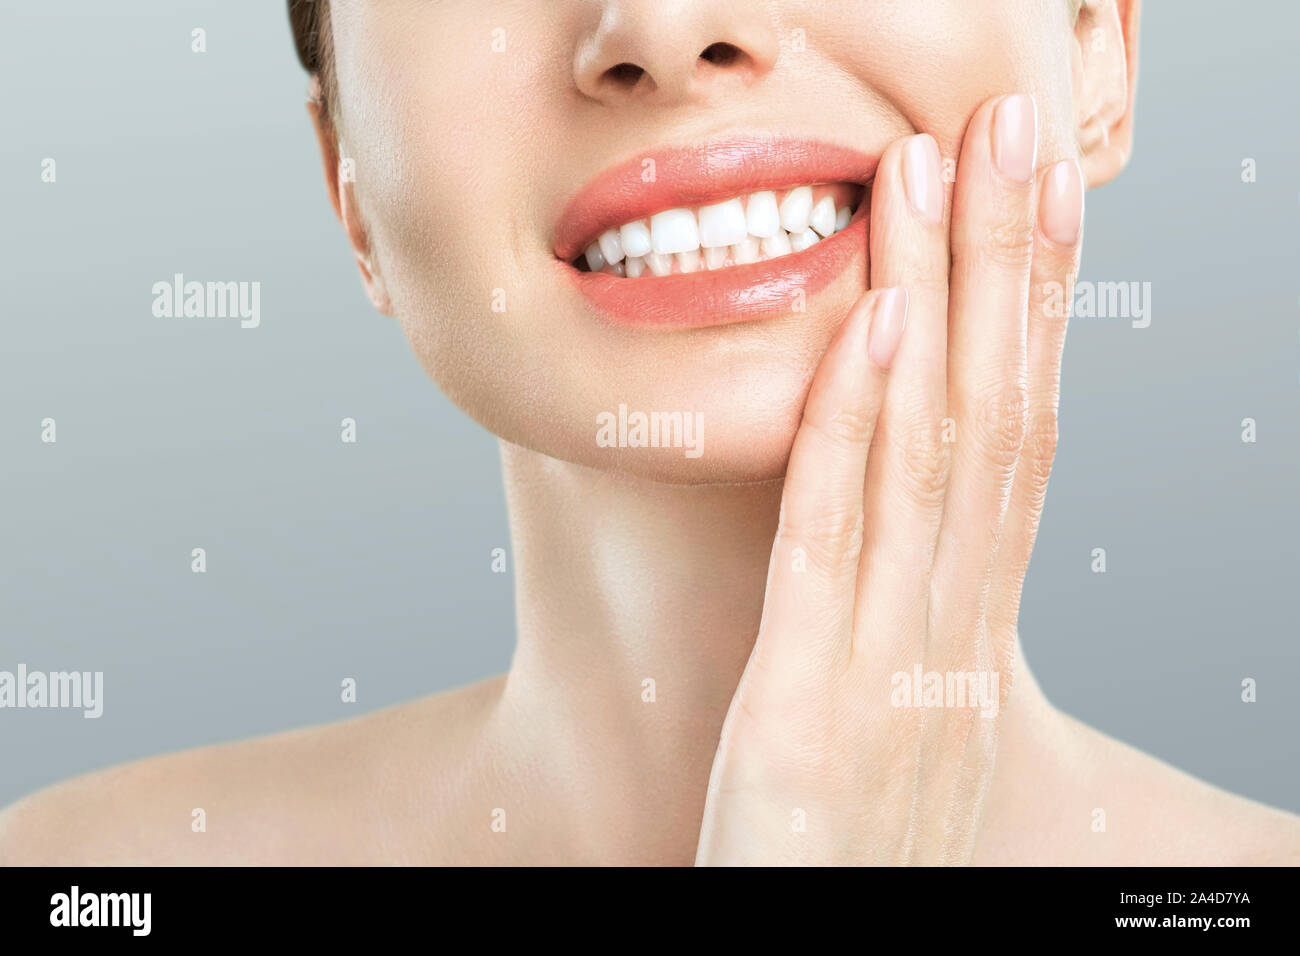 Tooth Pain And Dentistry. Young Woman Suffering From Strong Teeth Pain, Touching Cheek With Hand. Female Feeling Painful Toothache. Dentistry Care Stock Photo